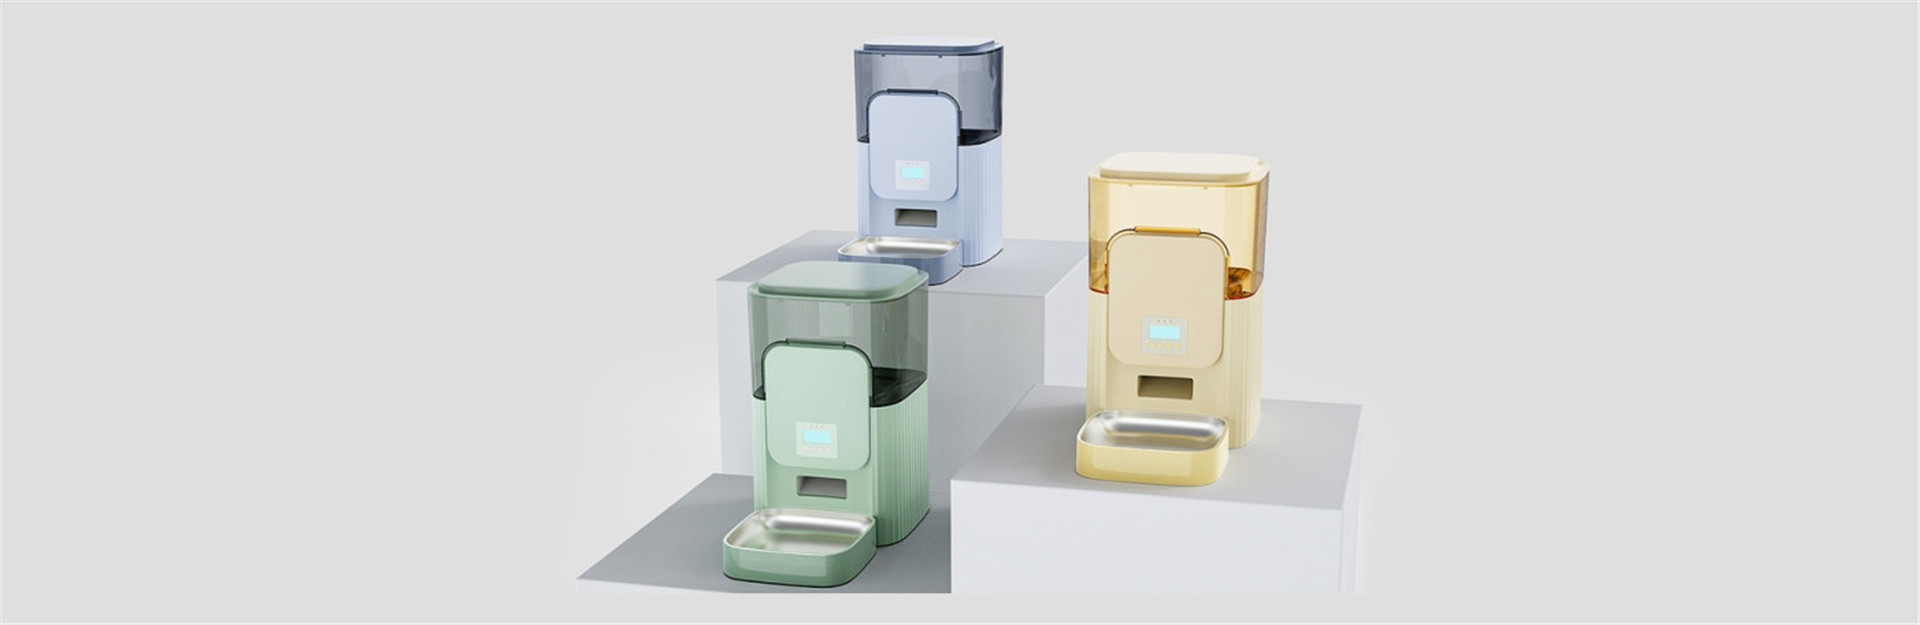 Automatic Pet Feeder (1)3ux